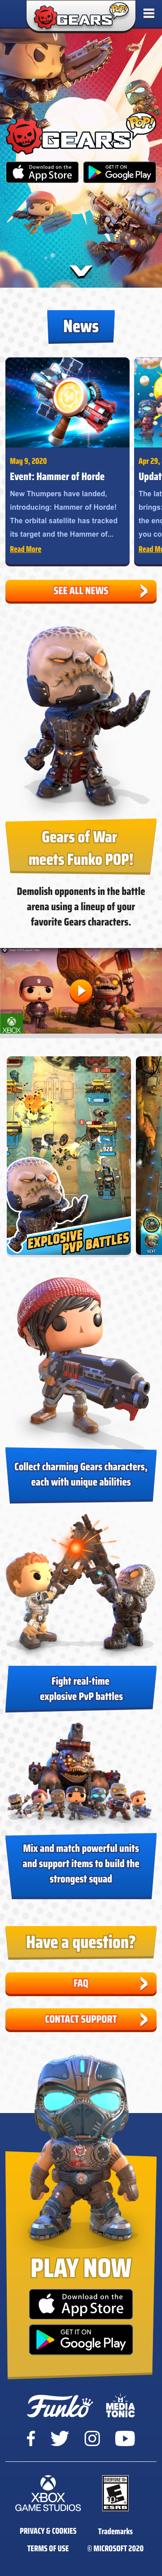 Gears POP! on mobile for global launch